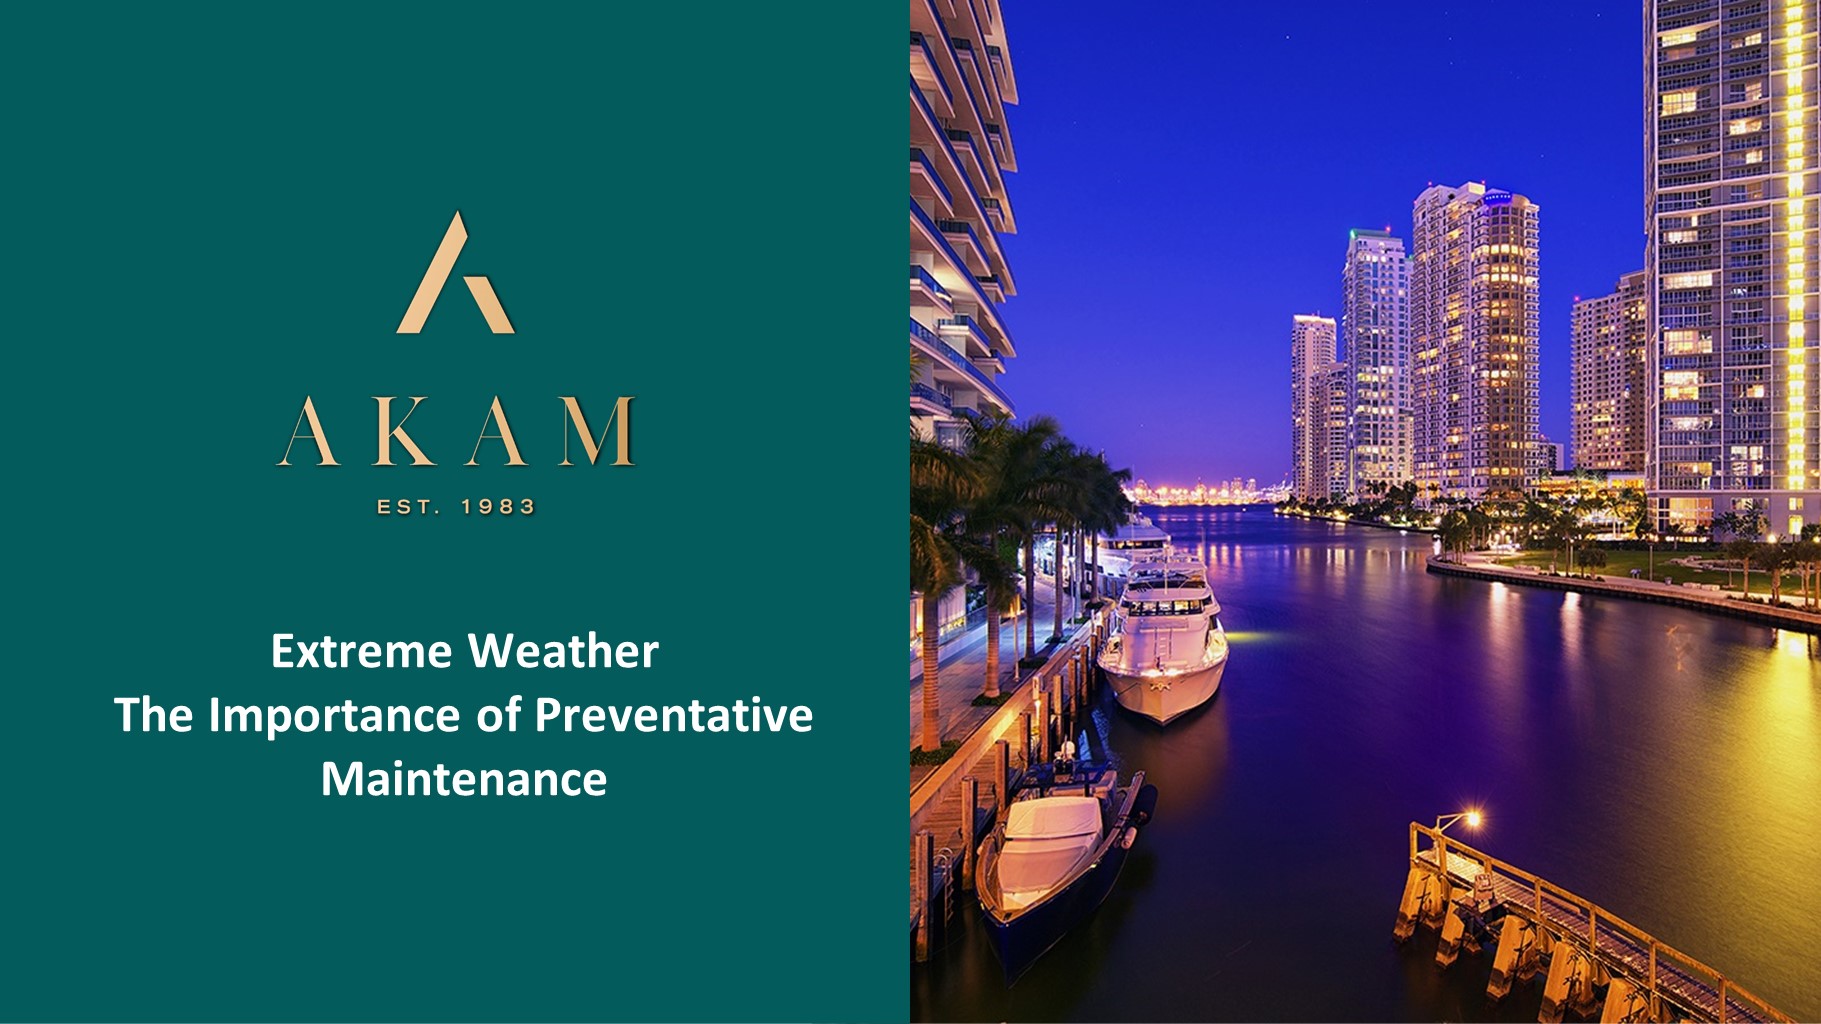 Extreme Weather: The Importance of Preventative Maintenance